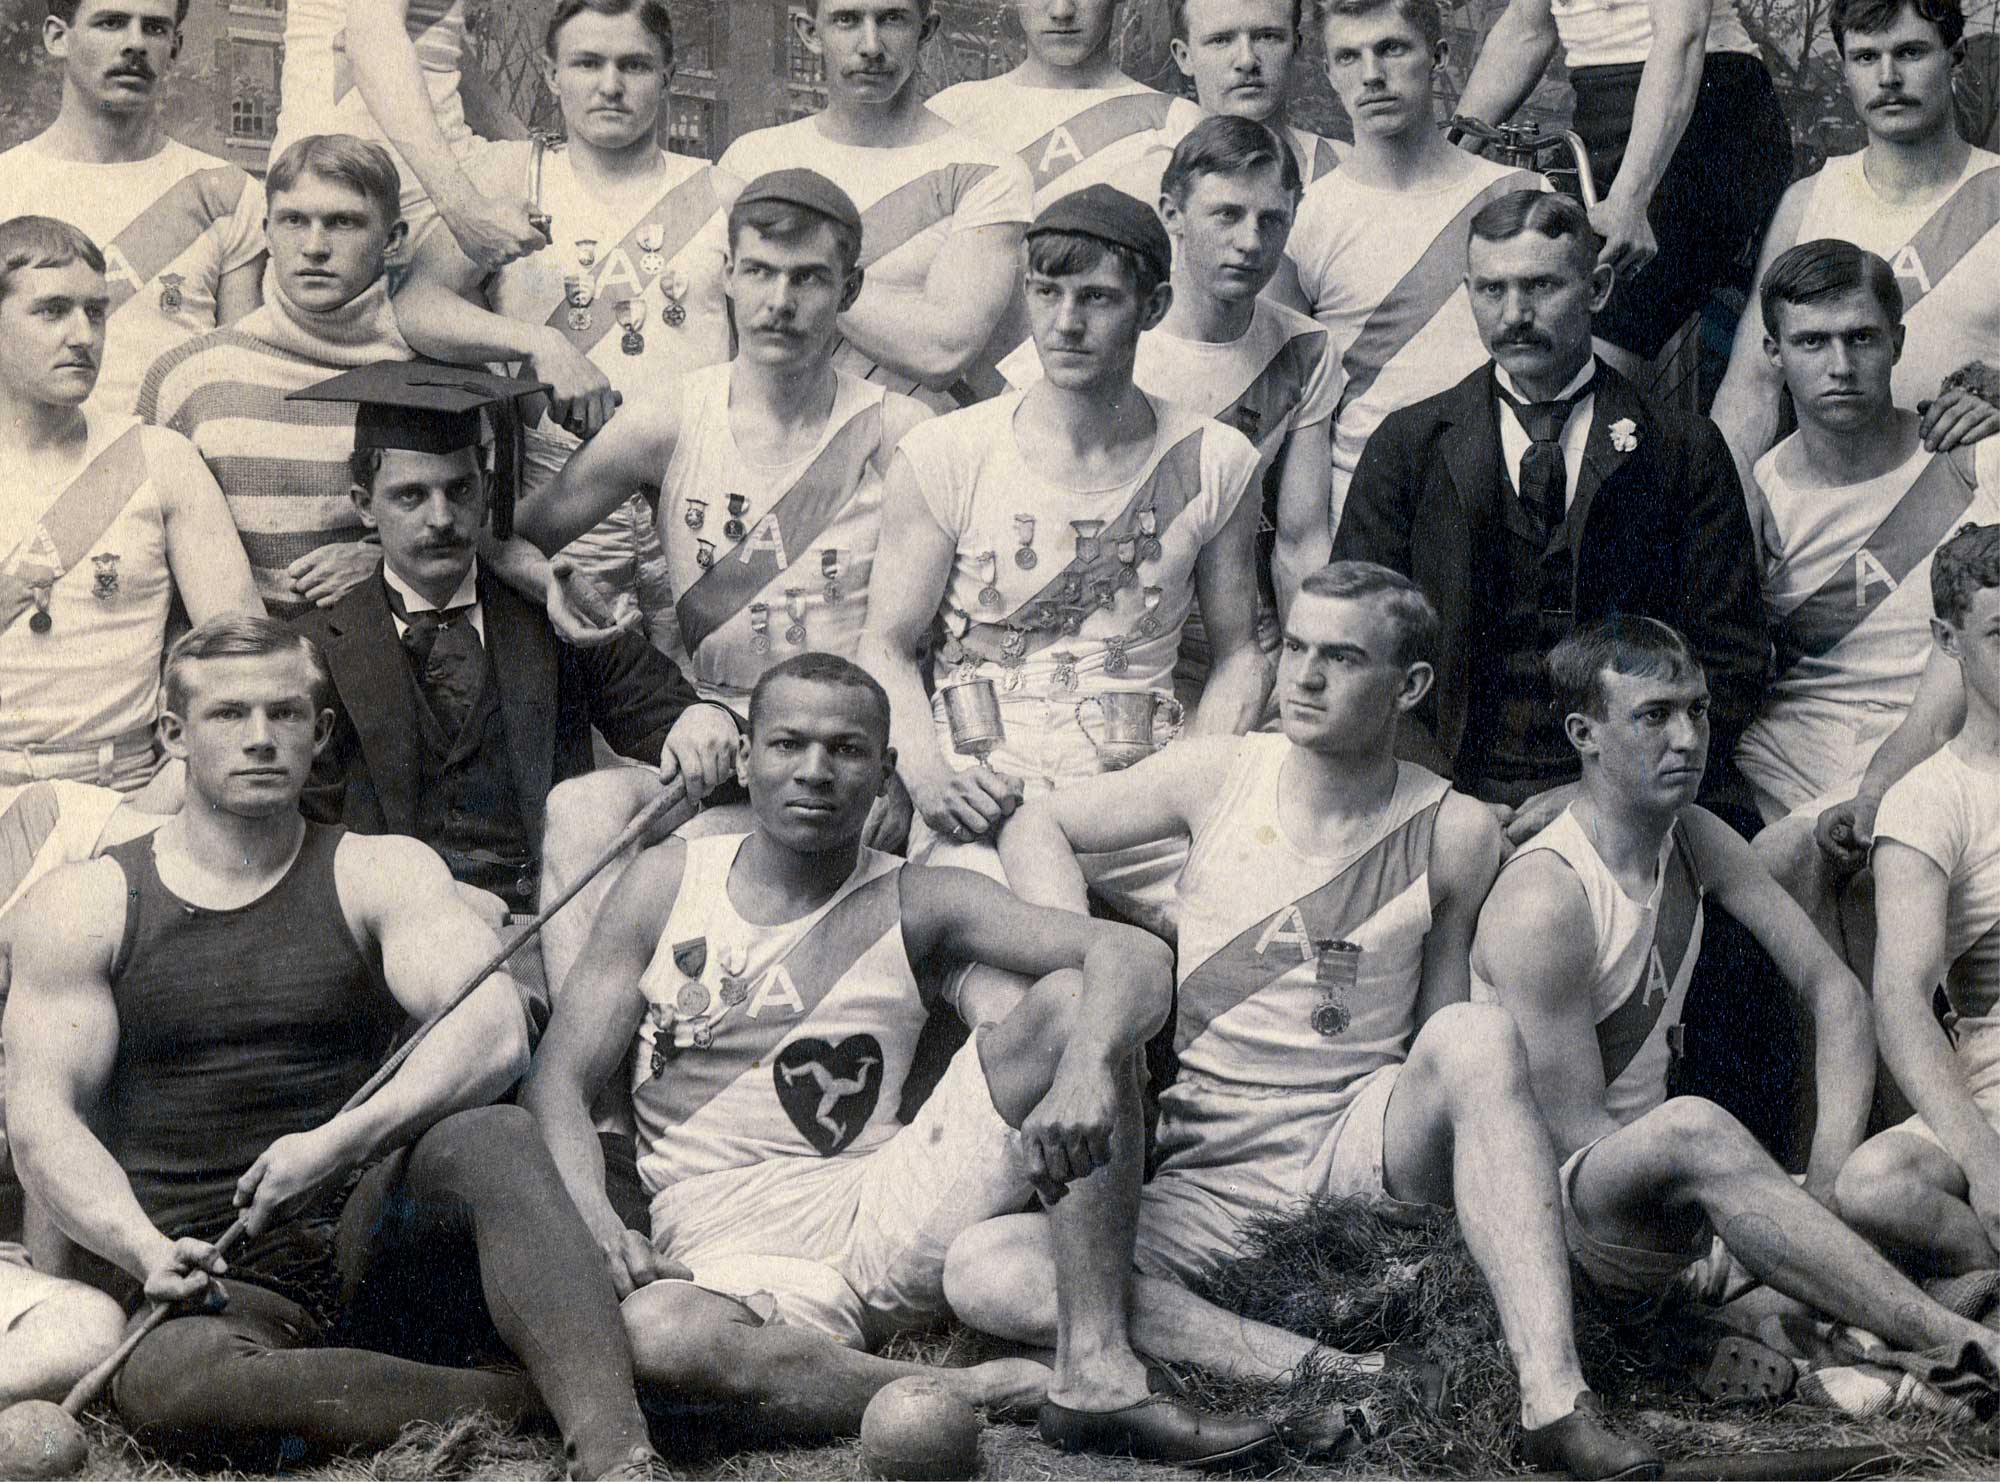 Men's track and field team from the 1800s